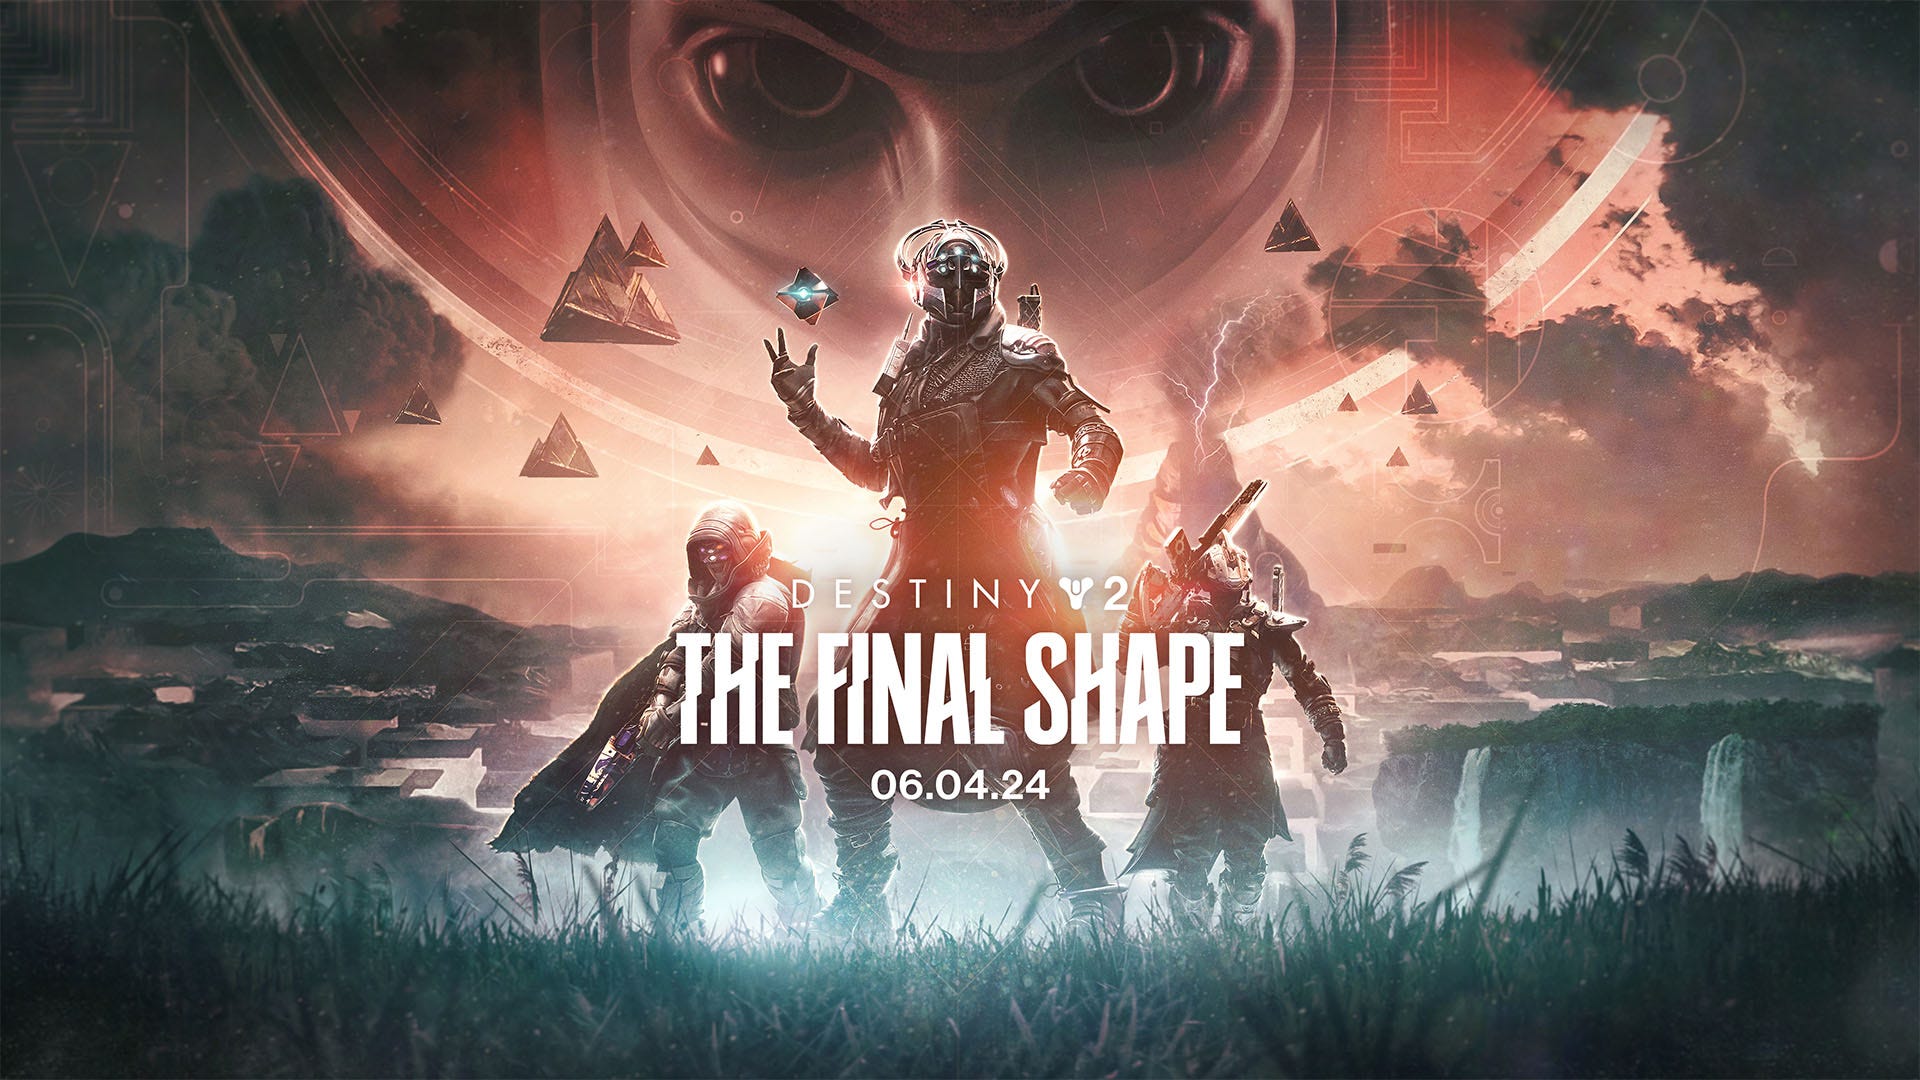 Find out more about Destiny 2's The Final Shape next week